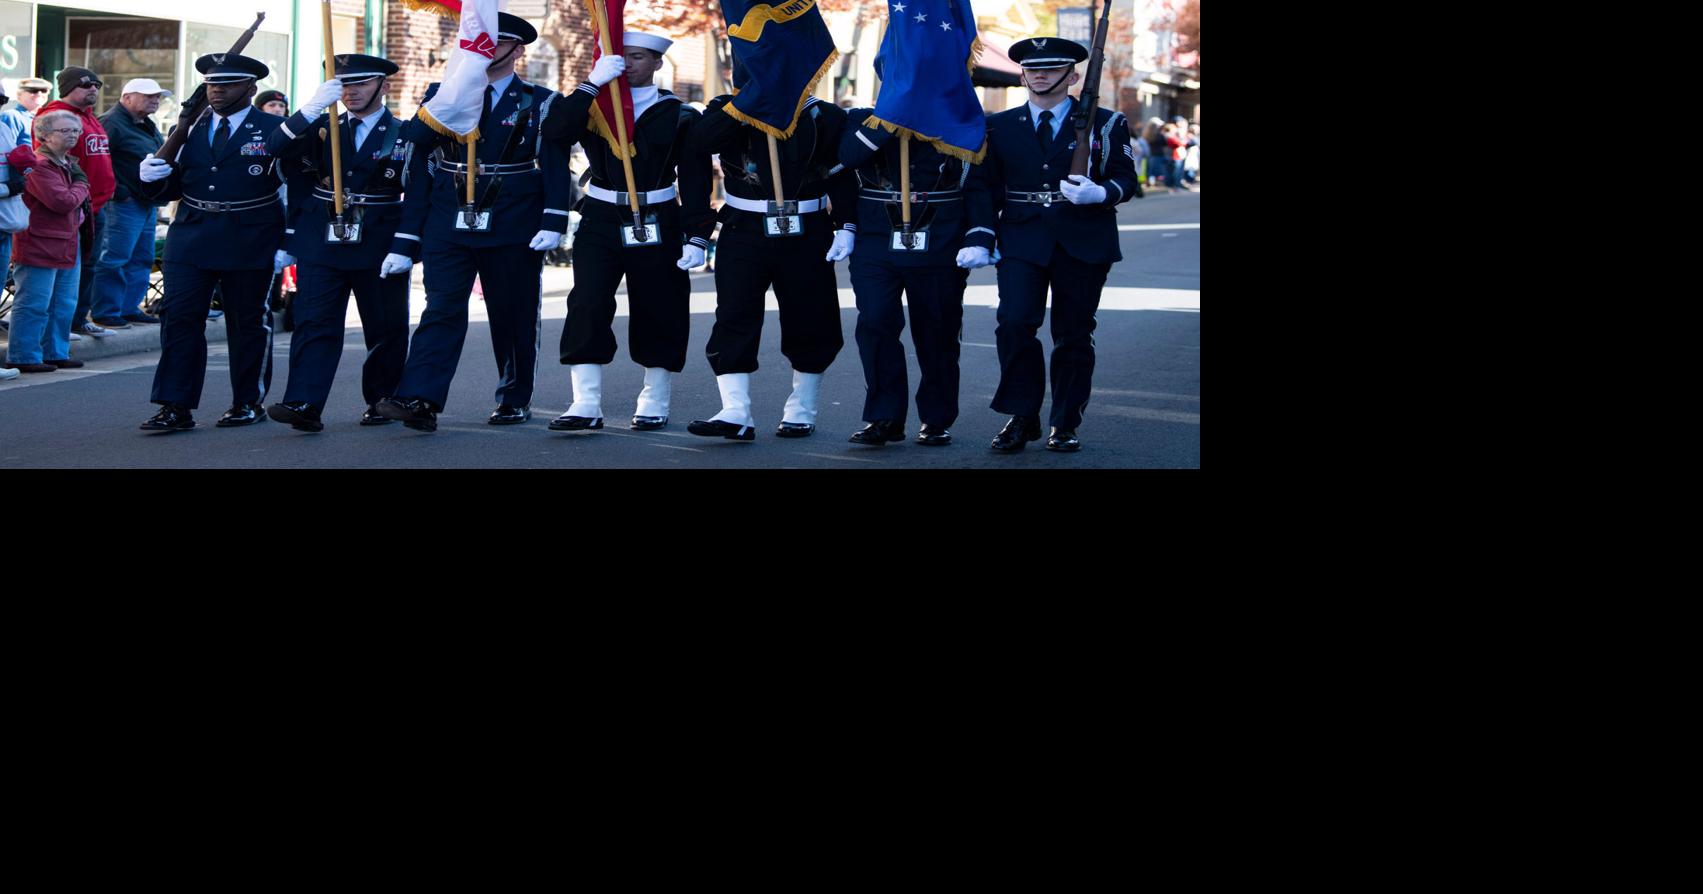 Veterans Day parade returns to Old Town Manassas with a retired Marine